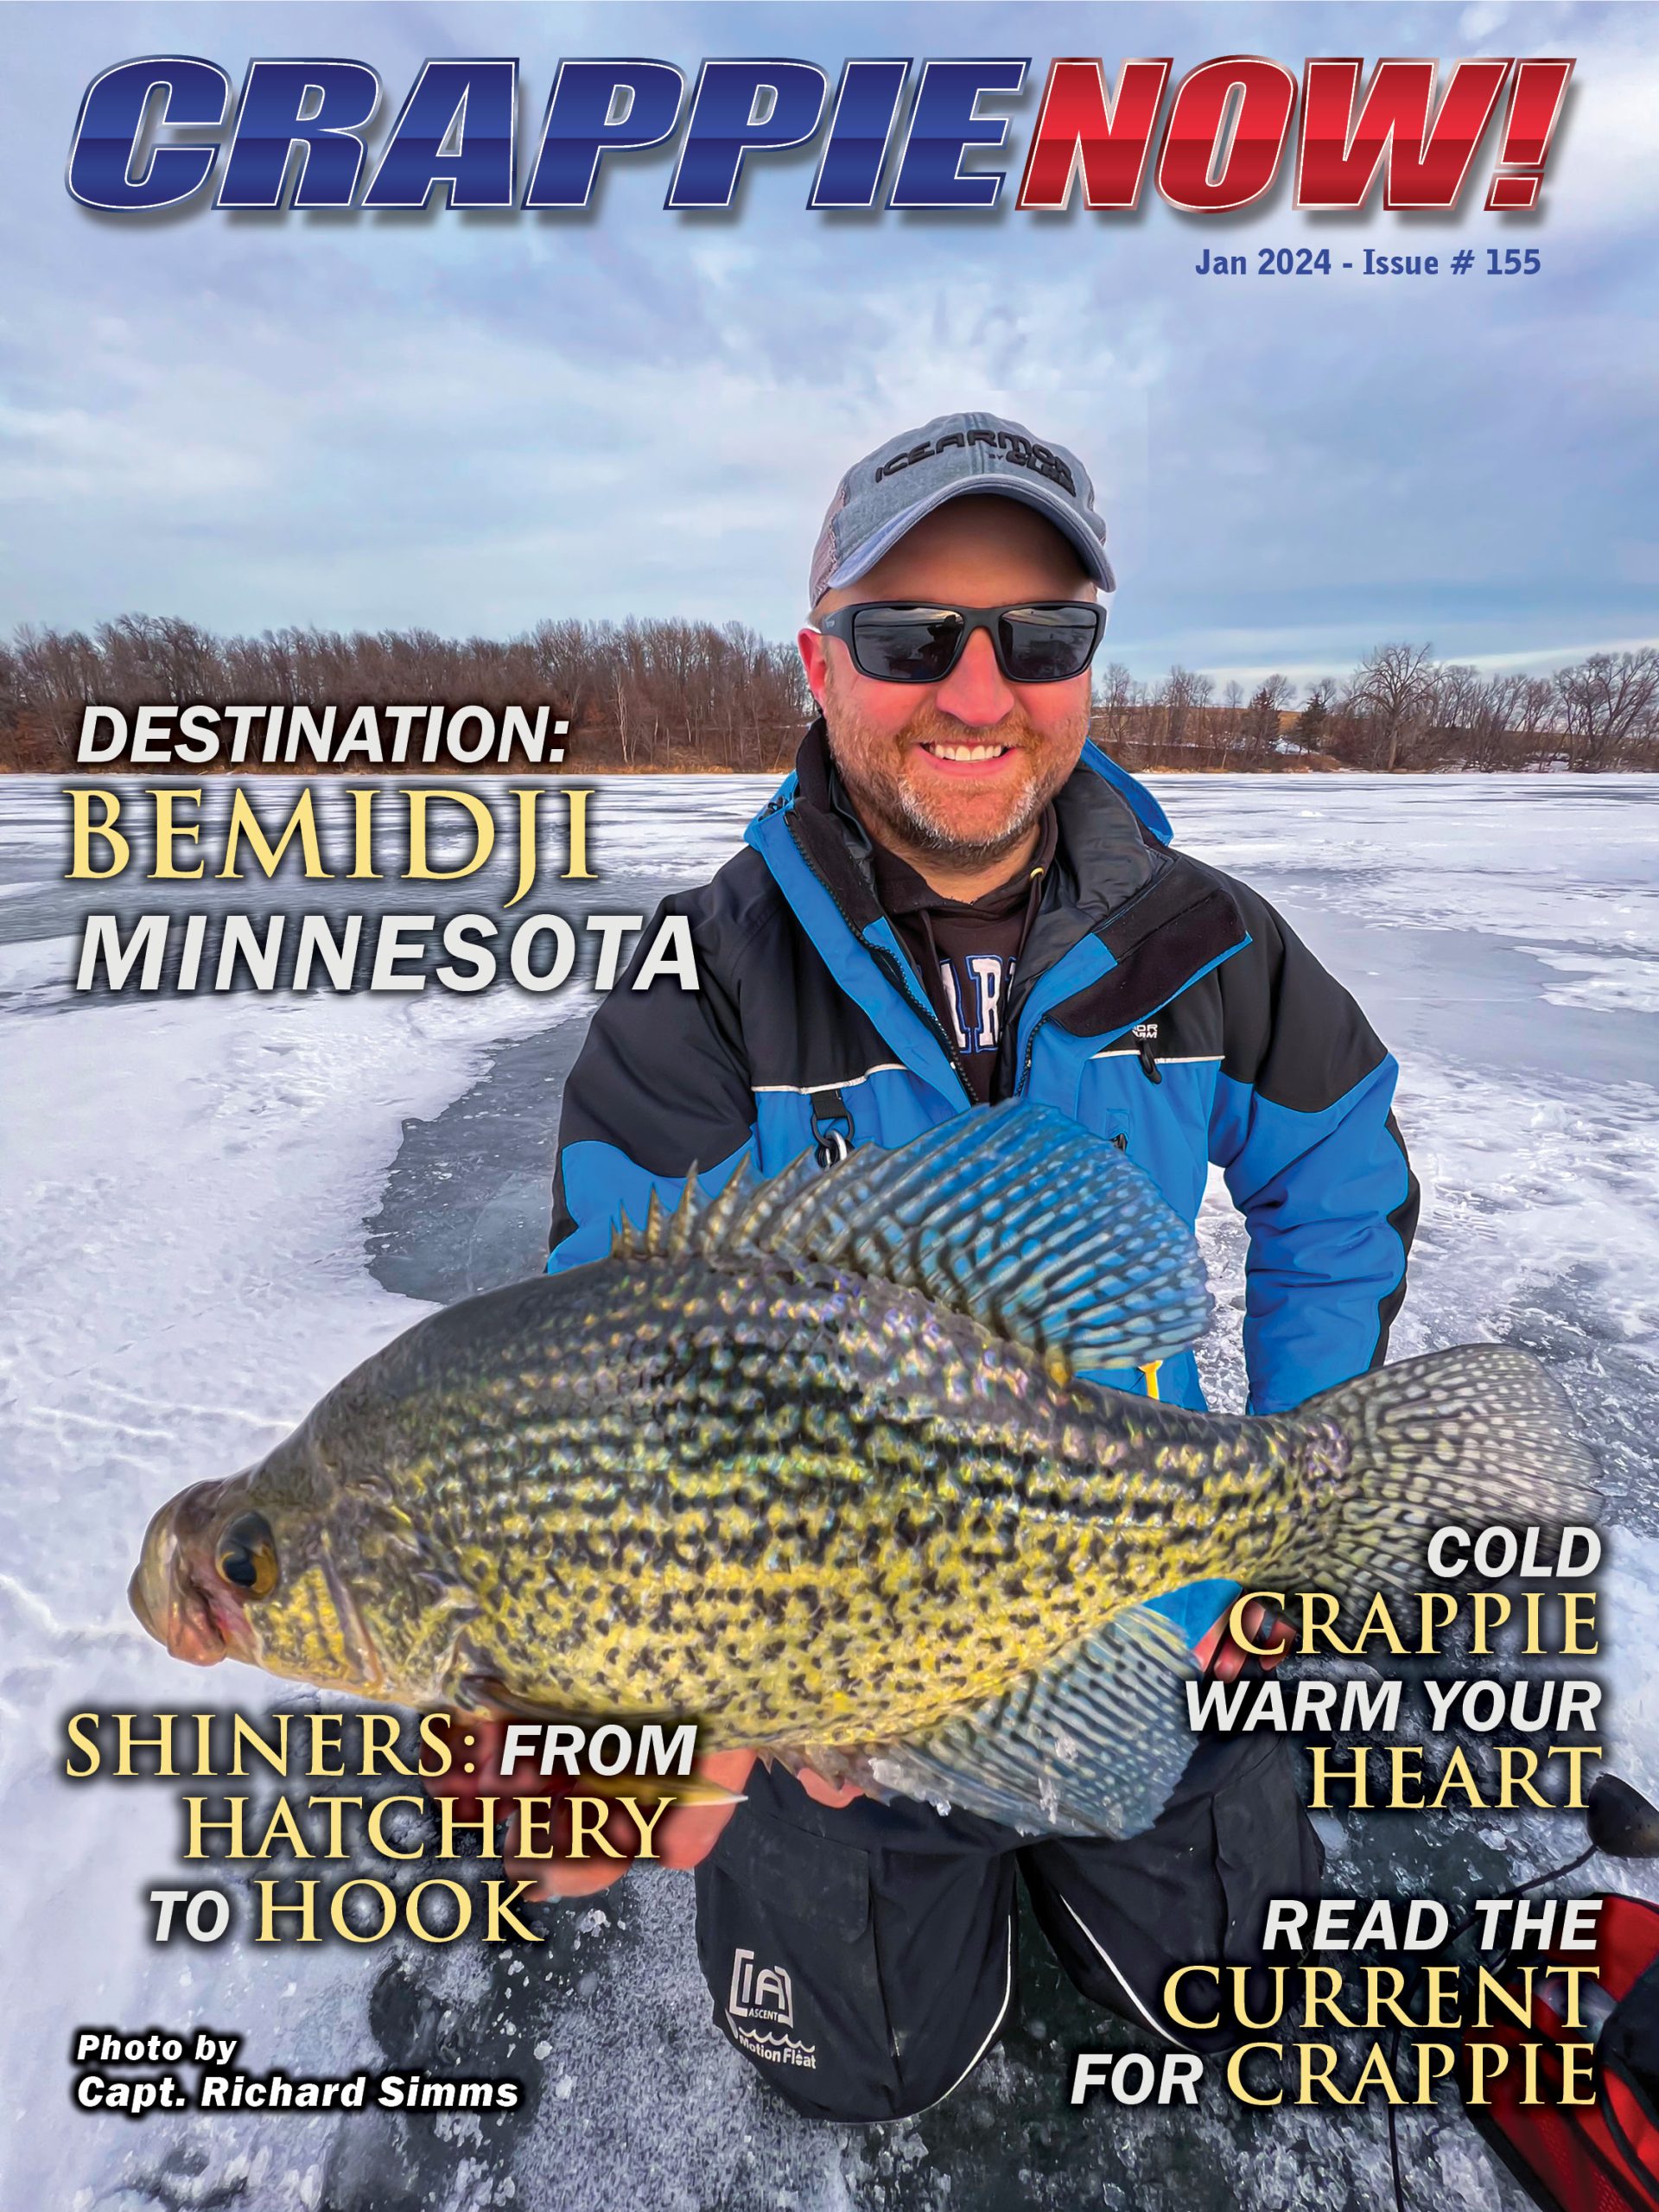 Top fishing tips for wintertime crappie